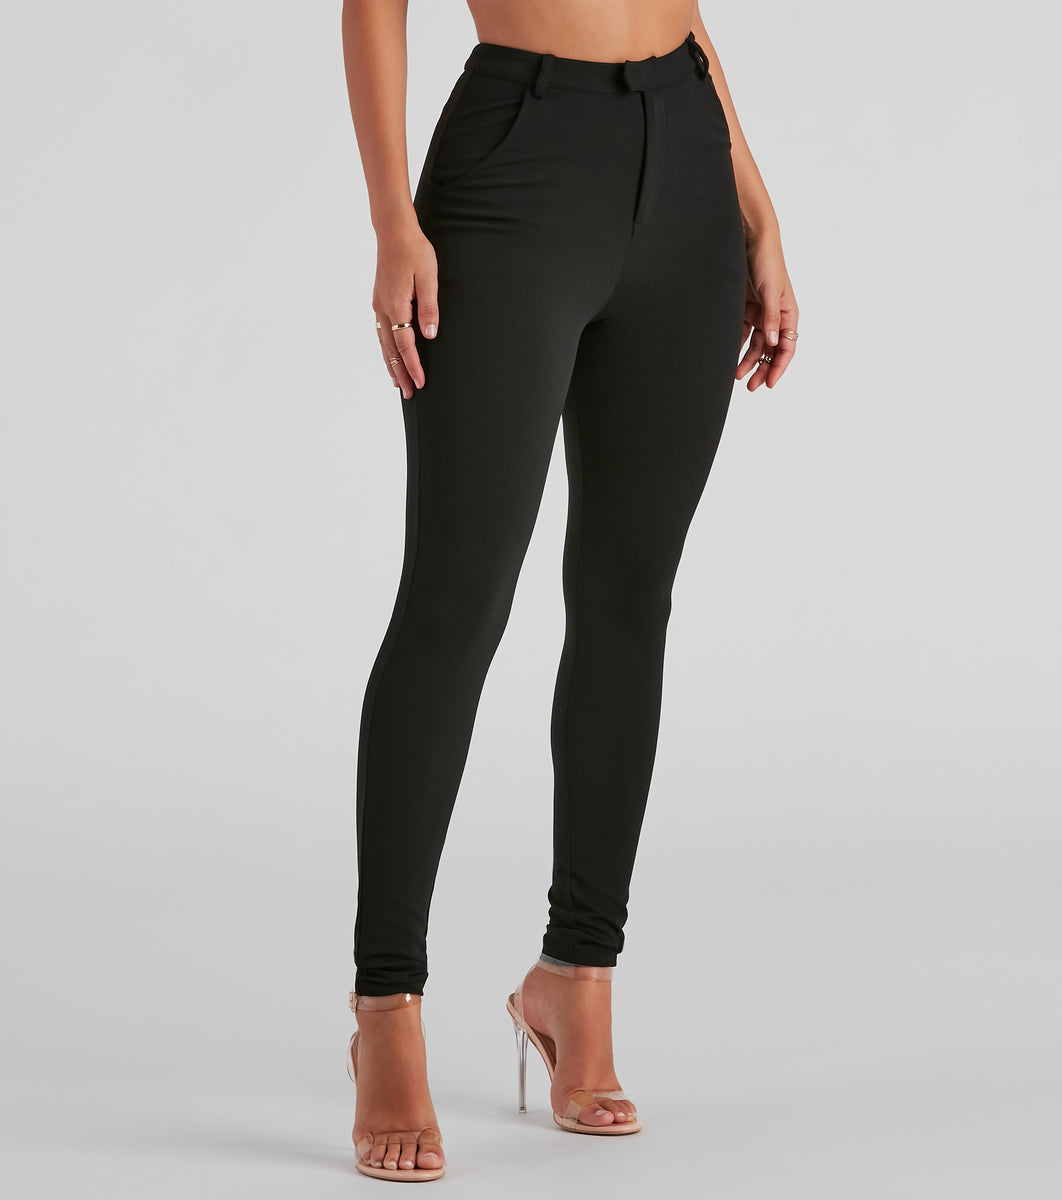 Windsor Contemporary Skinny Trouser Pants